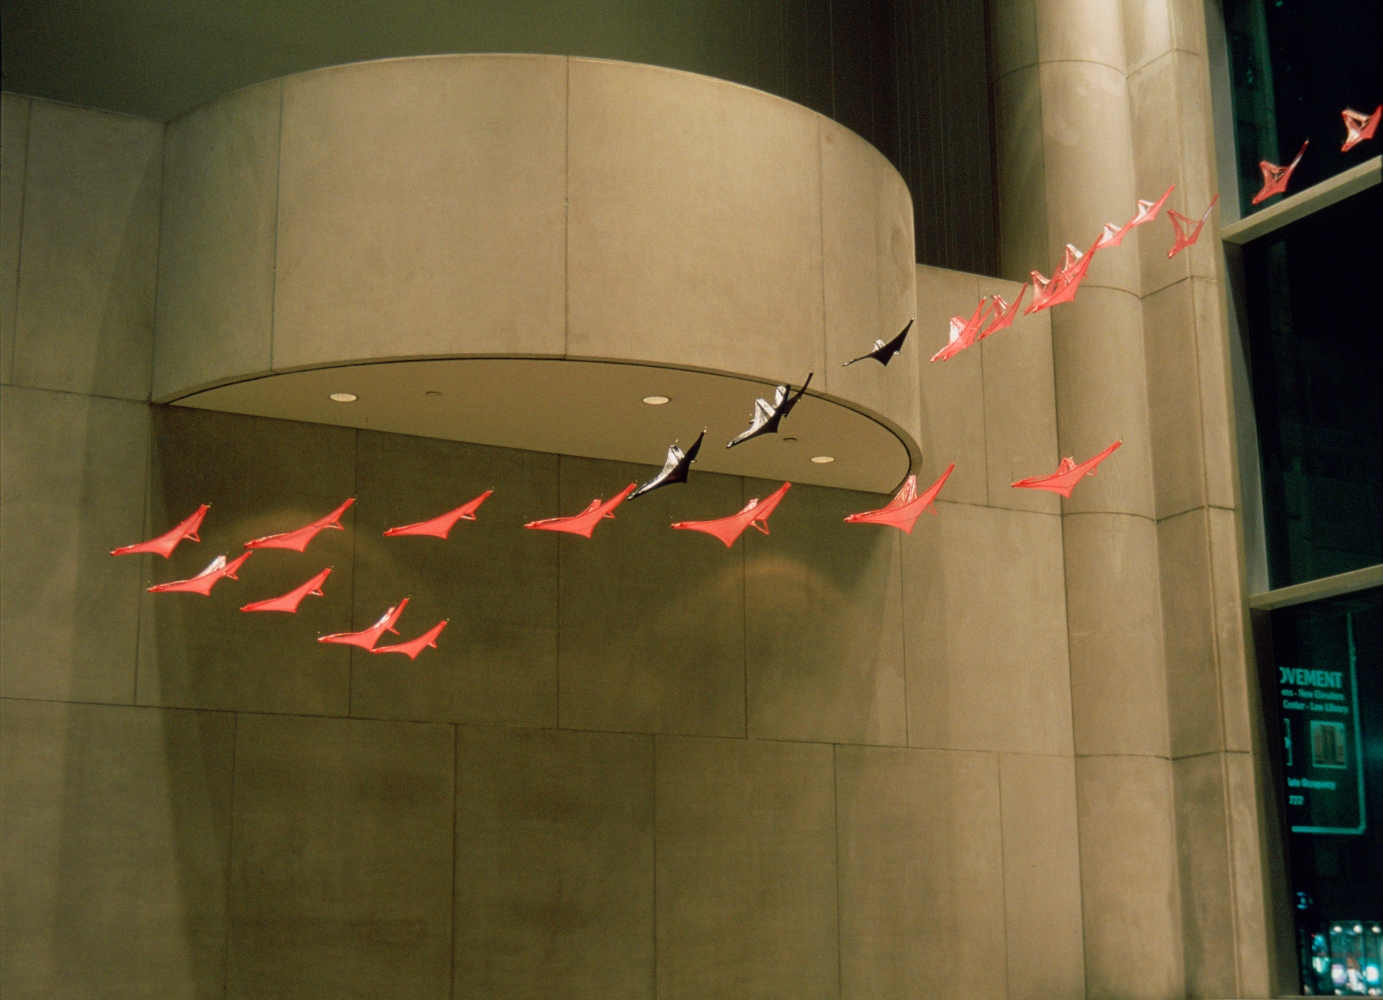 G-Force Installation, Whitney Museum of American Art at Philip Morris/Altria, NYC.